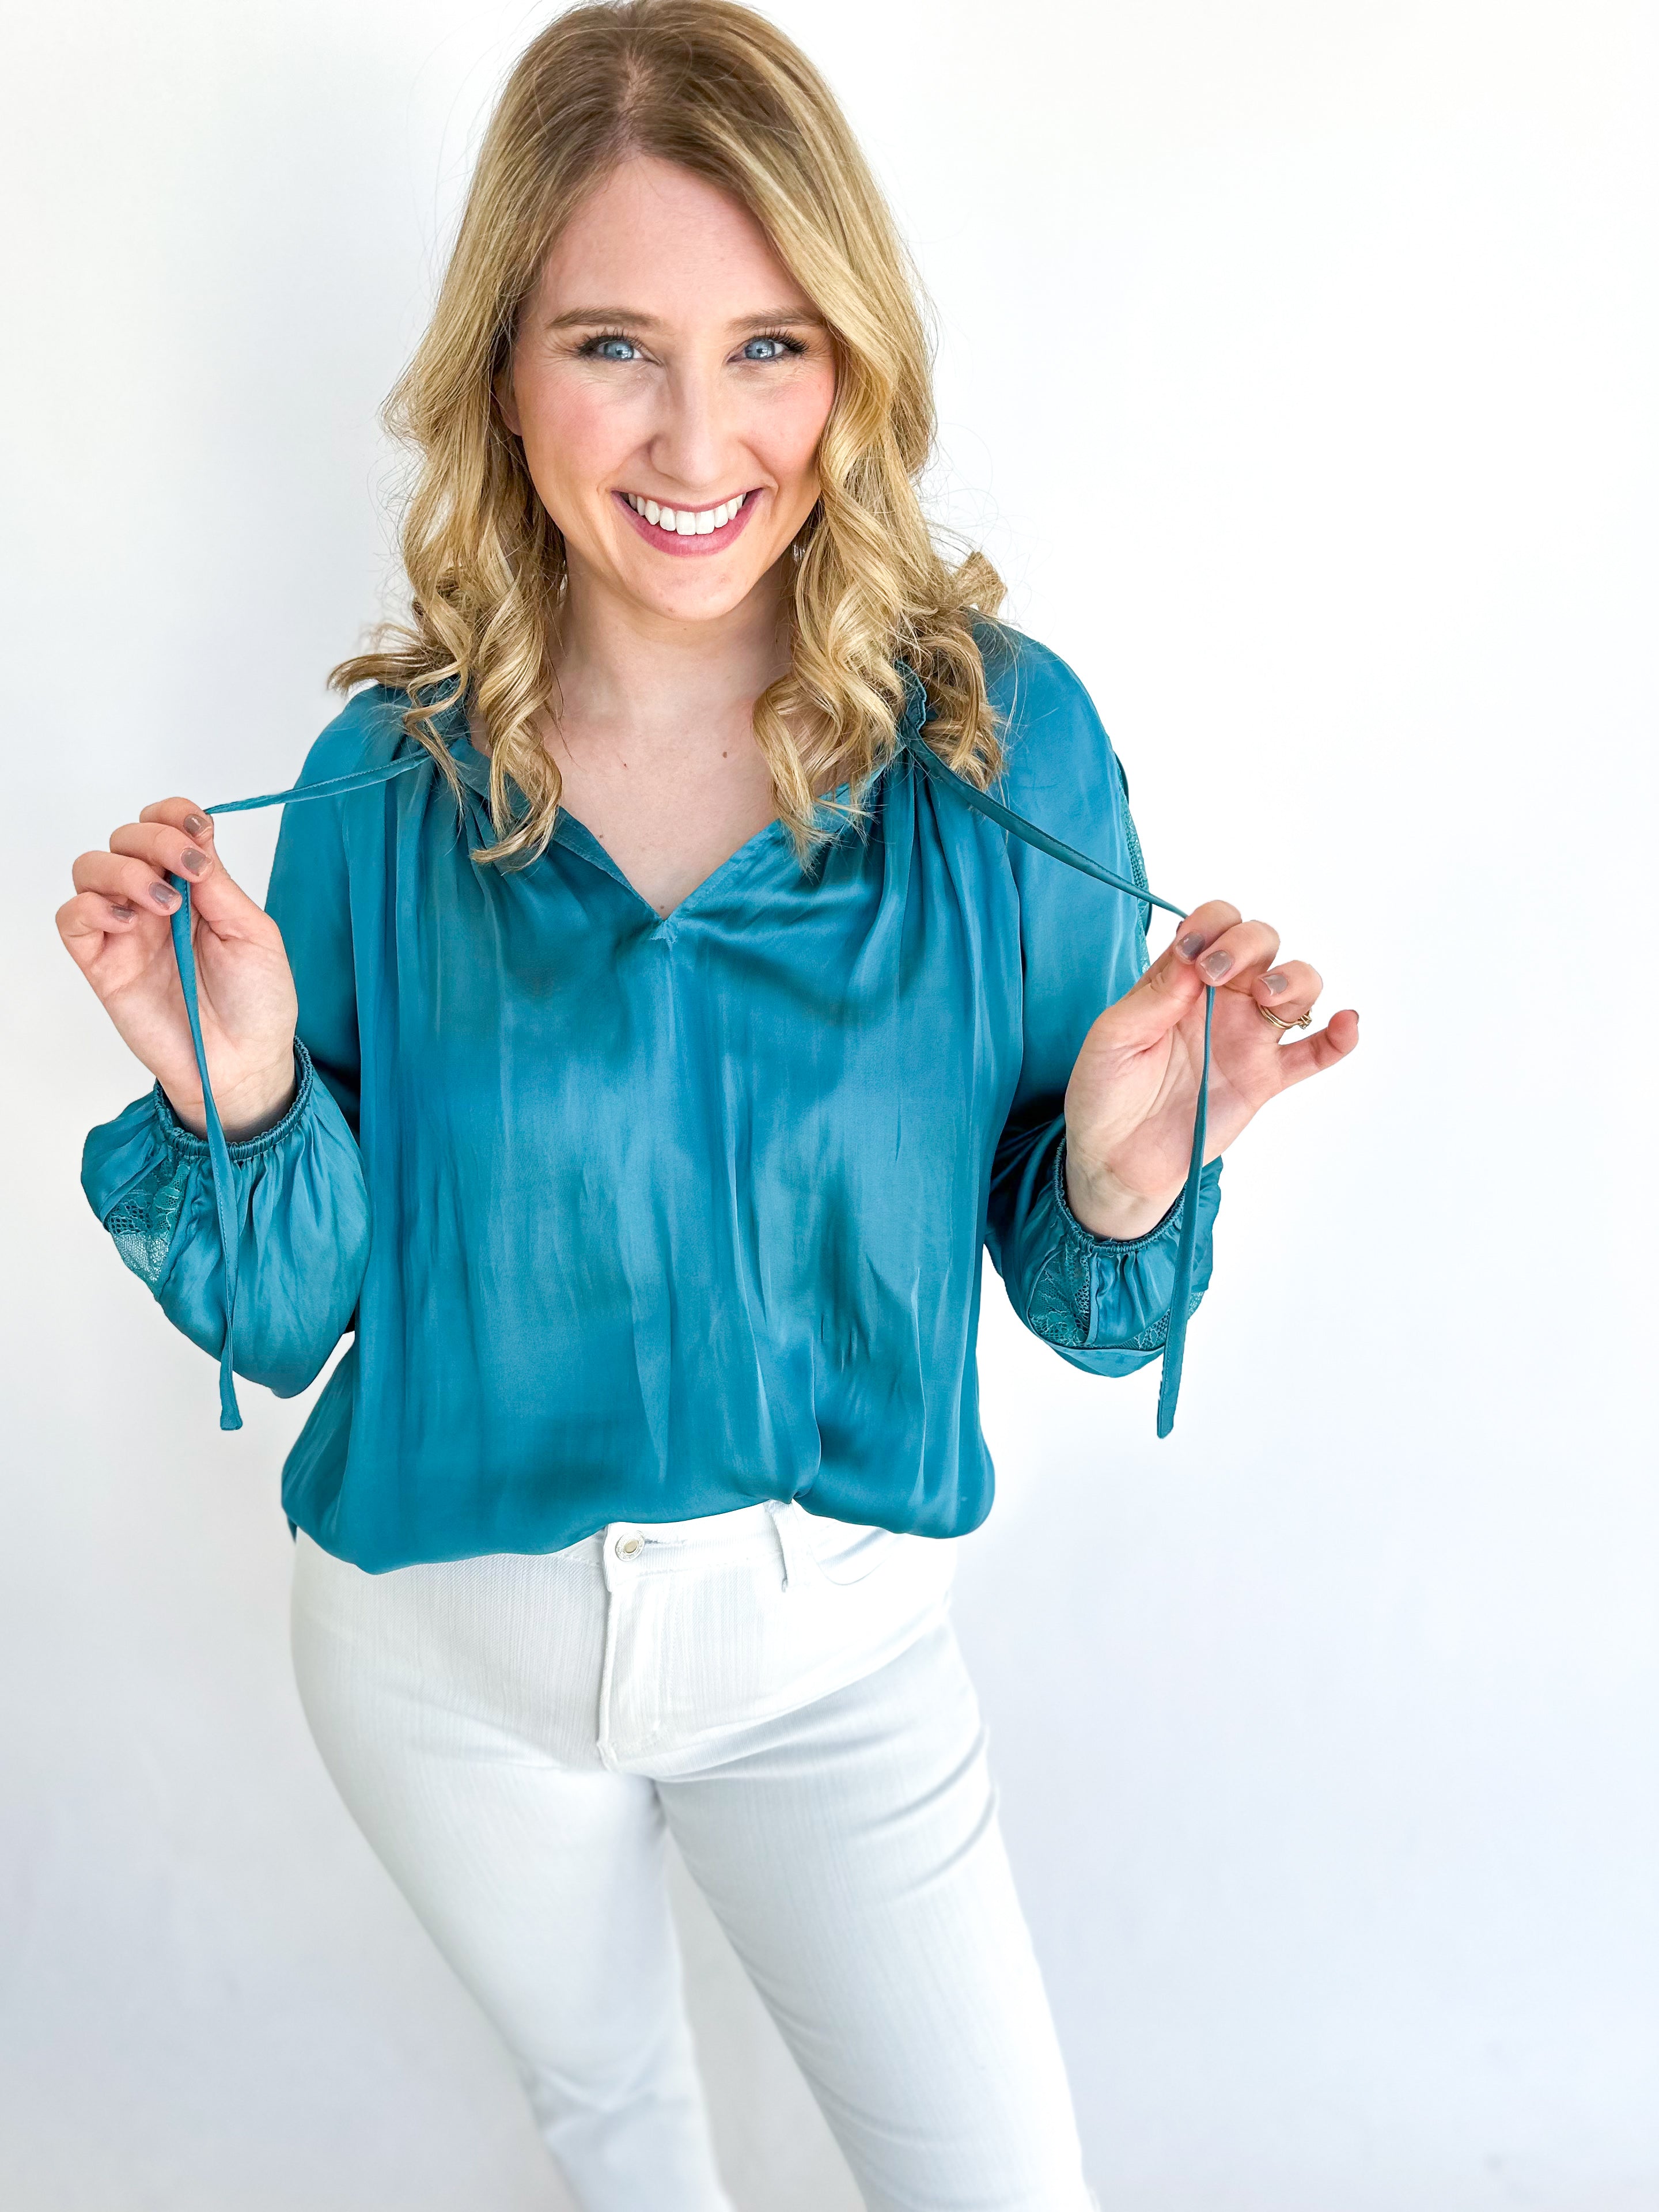 Ice Blue Lace Blouse-200 Fashion Blouses-CURRENT AIR CLOTHING-July & June Women's Fashion Boutique Located in San Antonio, Texas